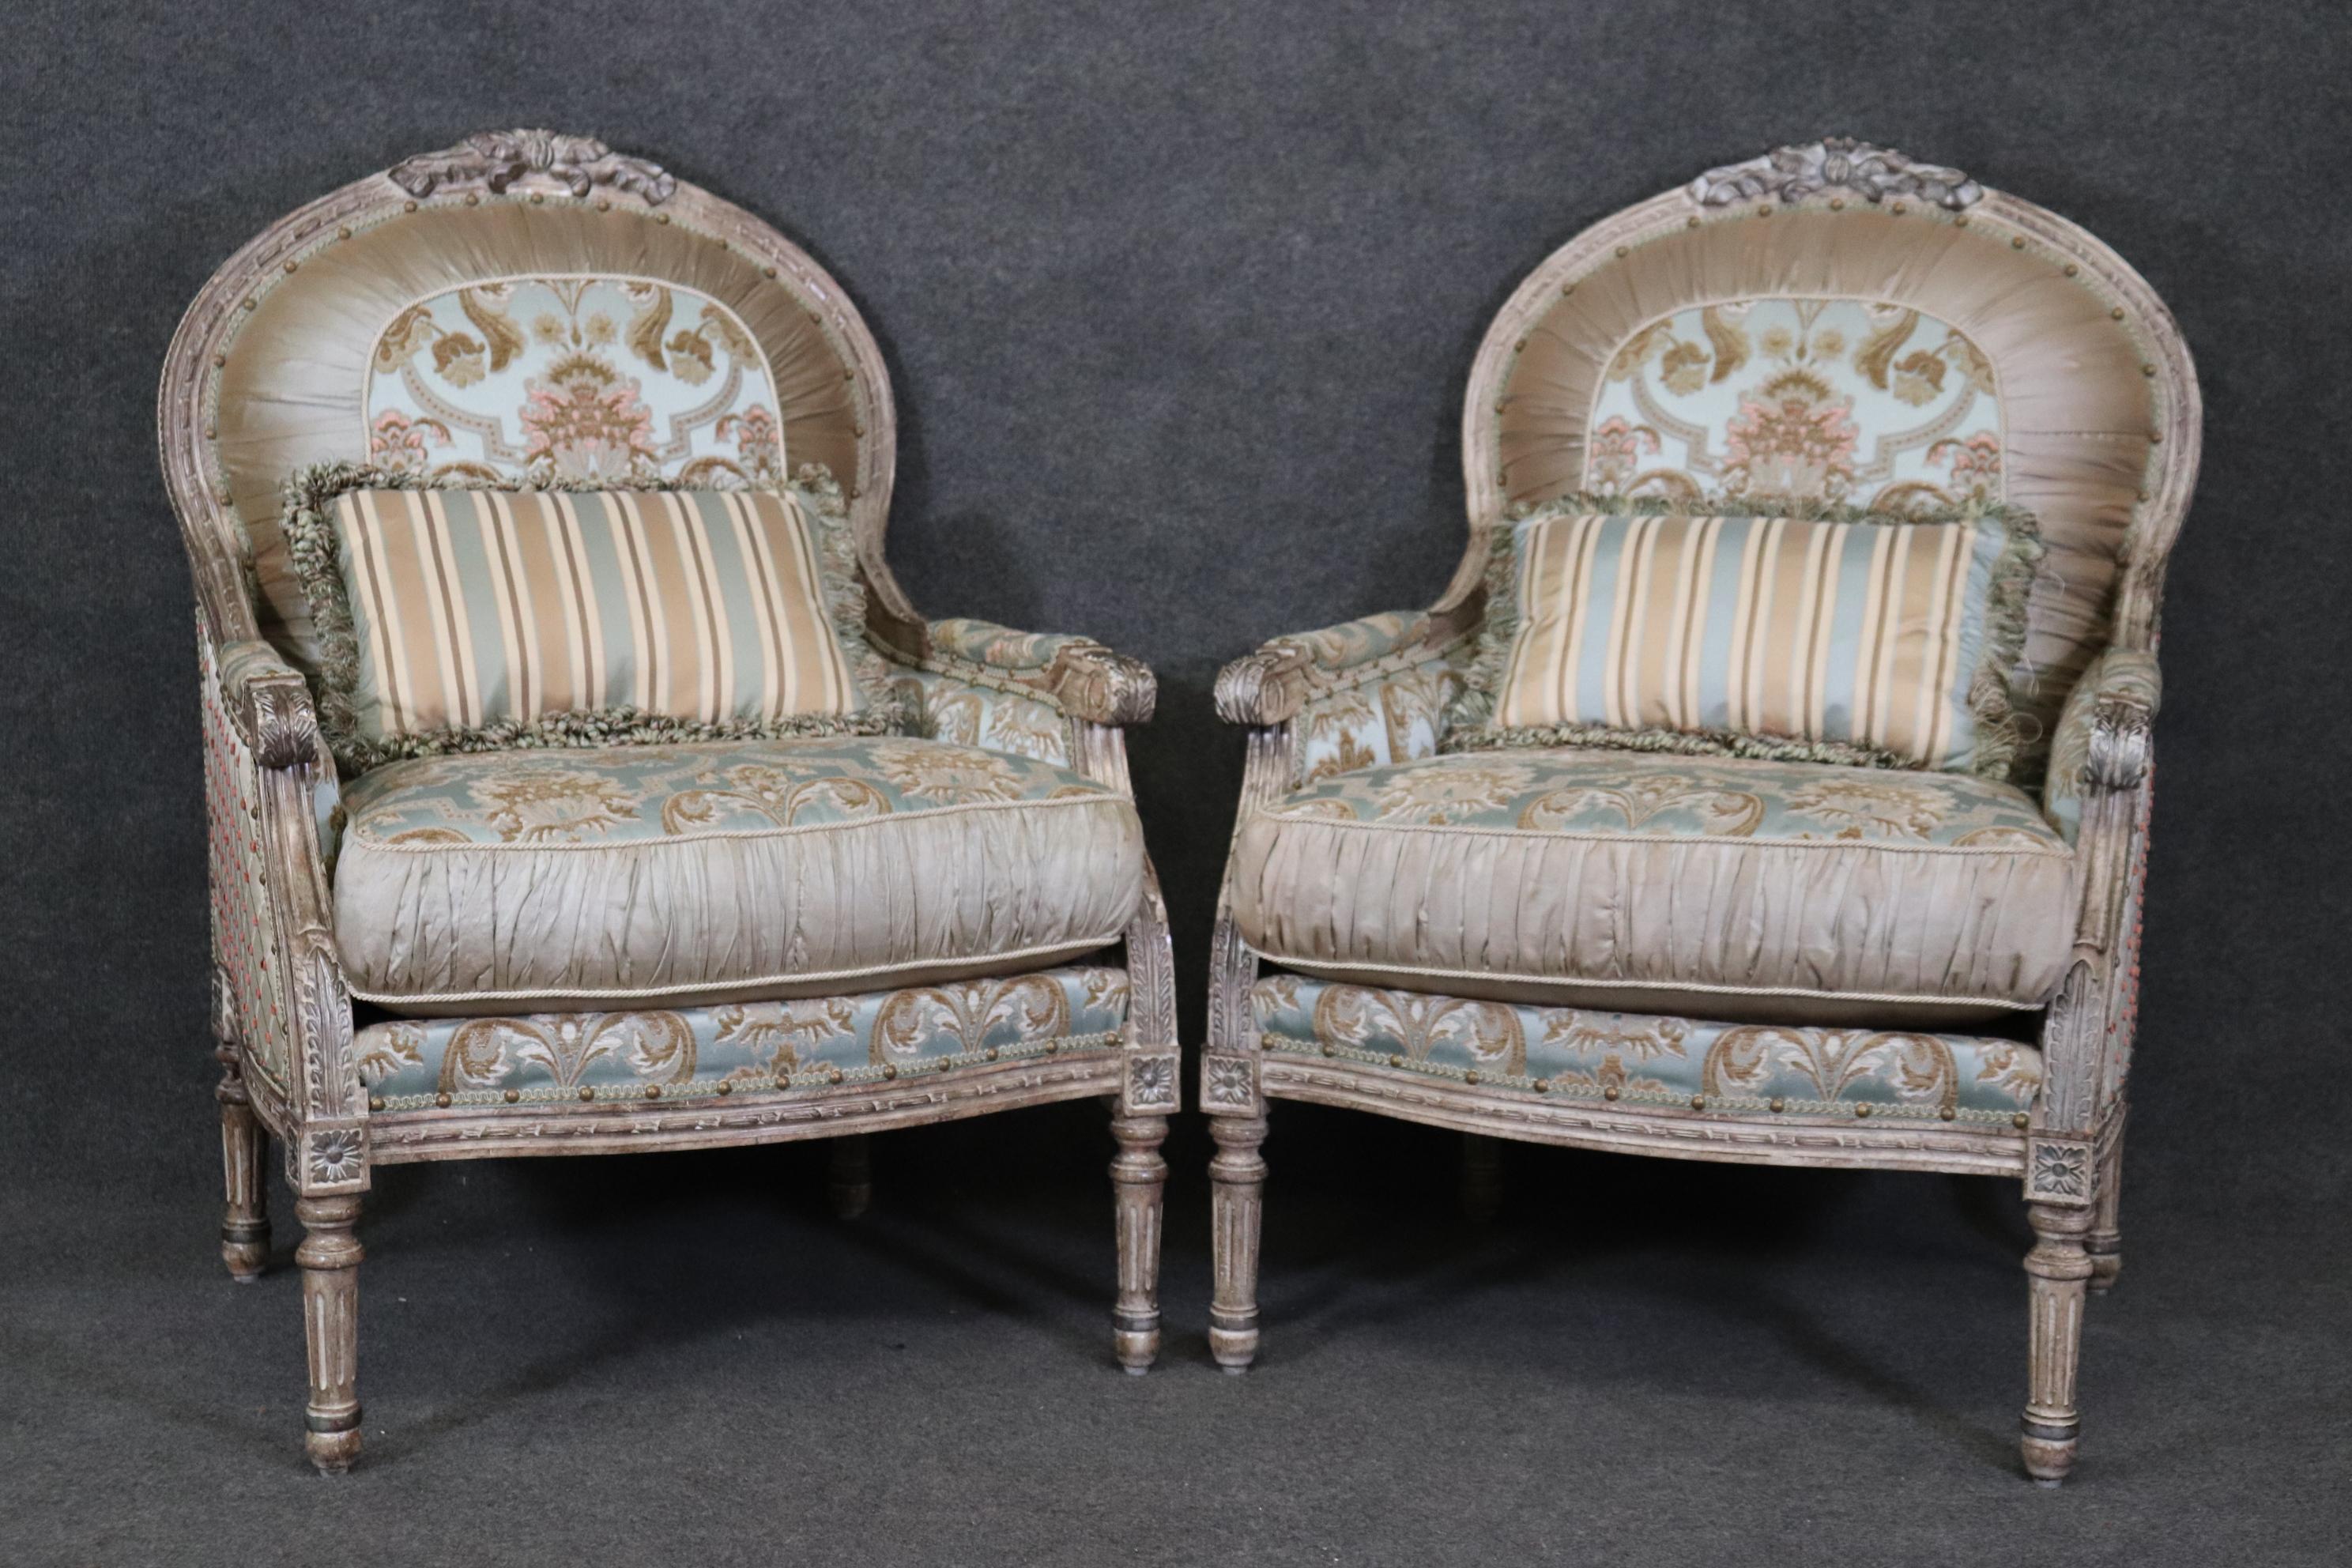  This is one of two pair available listed separately. This is a gorgeous pair of custom-upholstered French Louis bergere chairs or club chairs with gorgeous creme painted distressed finished frames and silver details on some of the carved areas. The